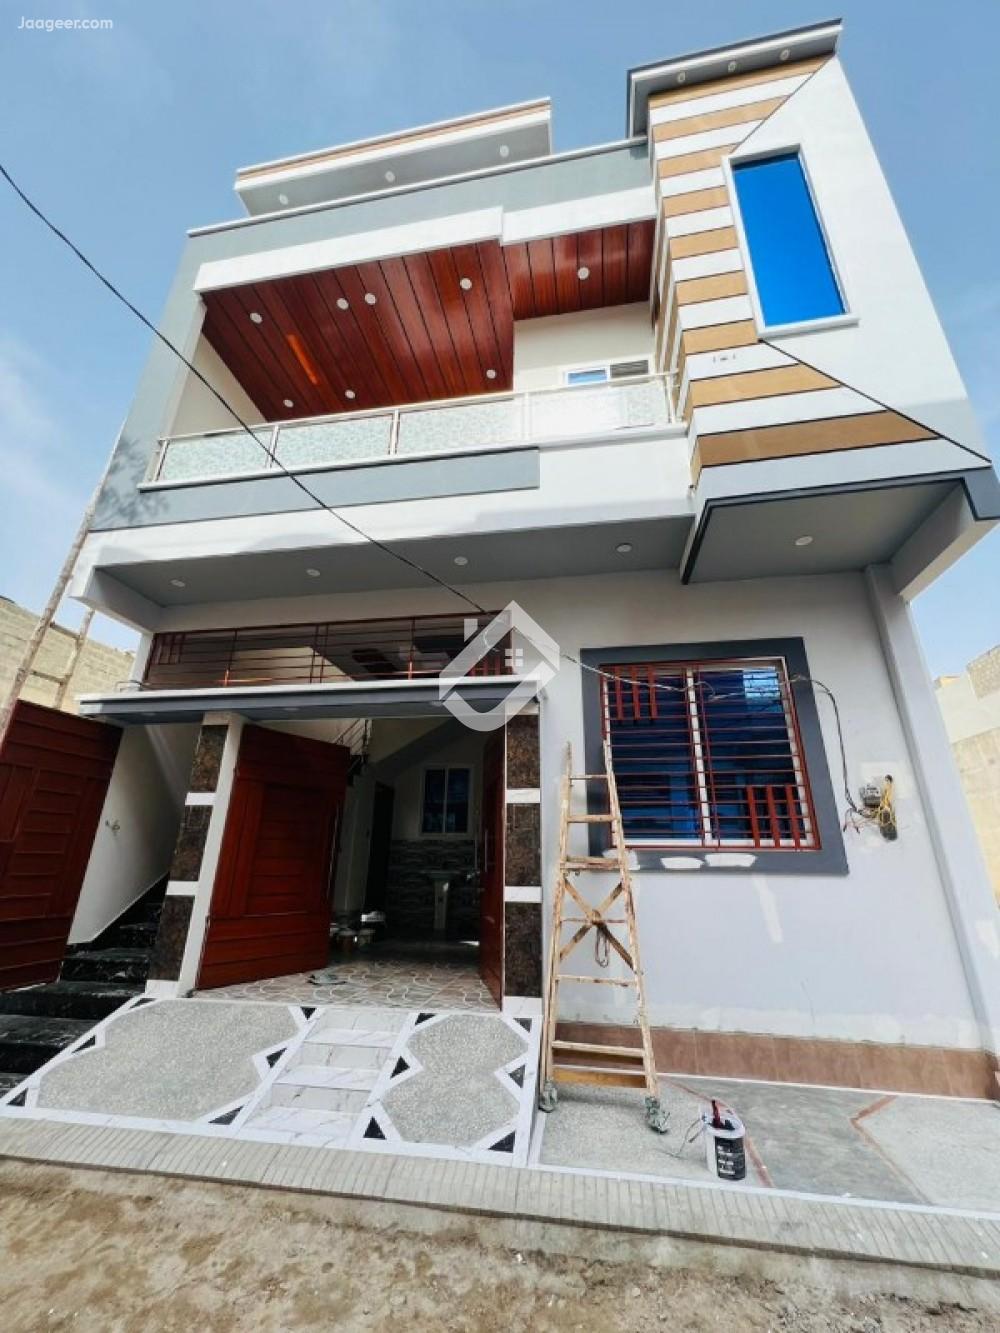 Main image 4 Marla Double Storey House For Sale In Saadi Town Scheem 33 --